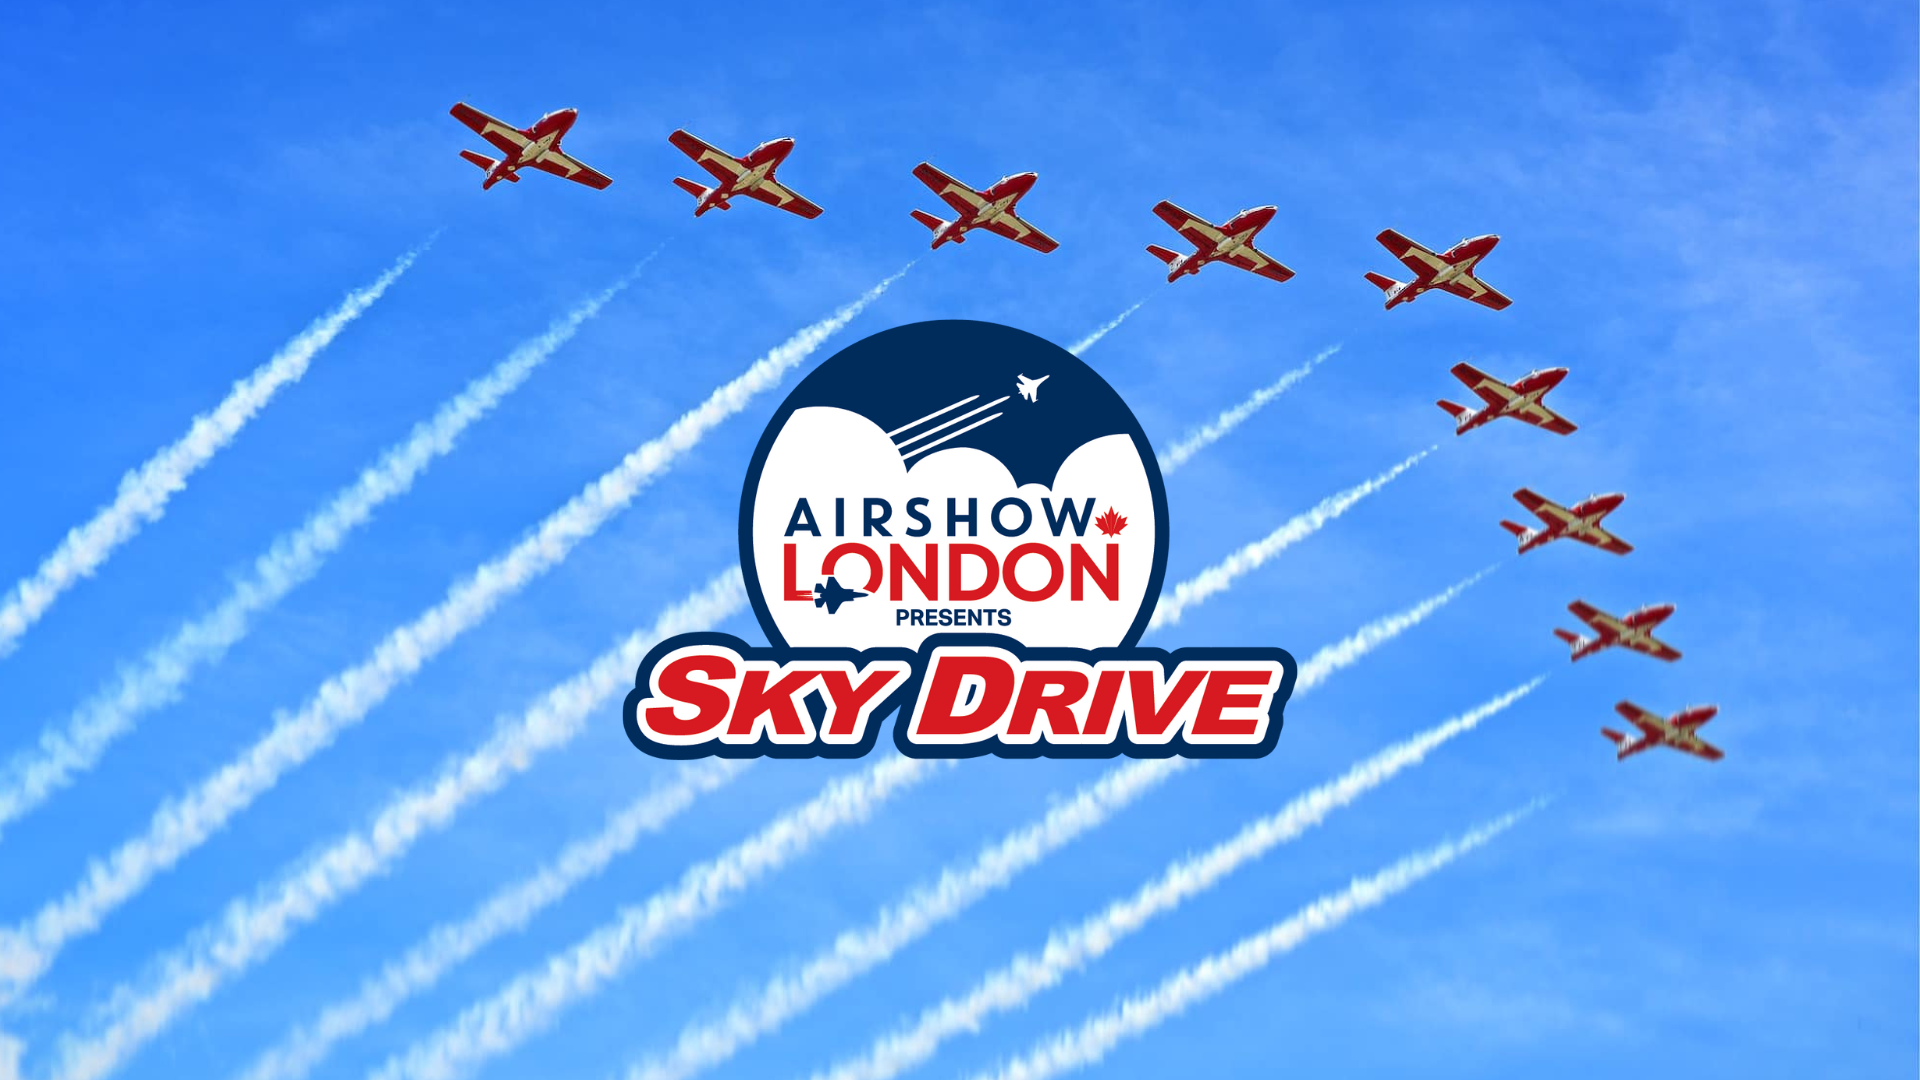 A graphic presenting the Airshow London event